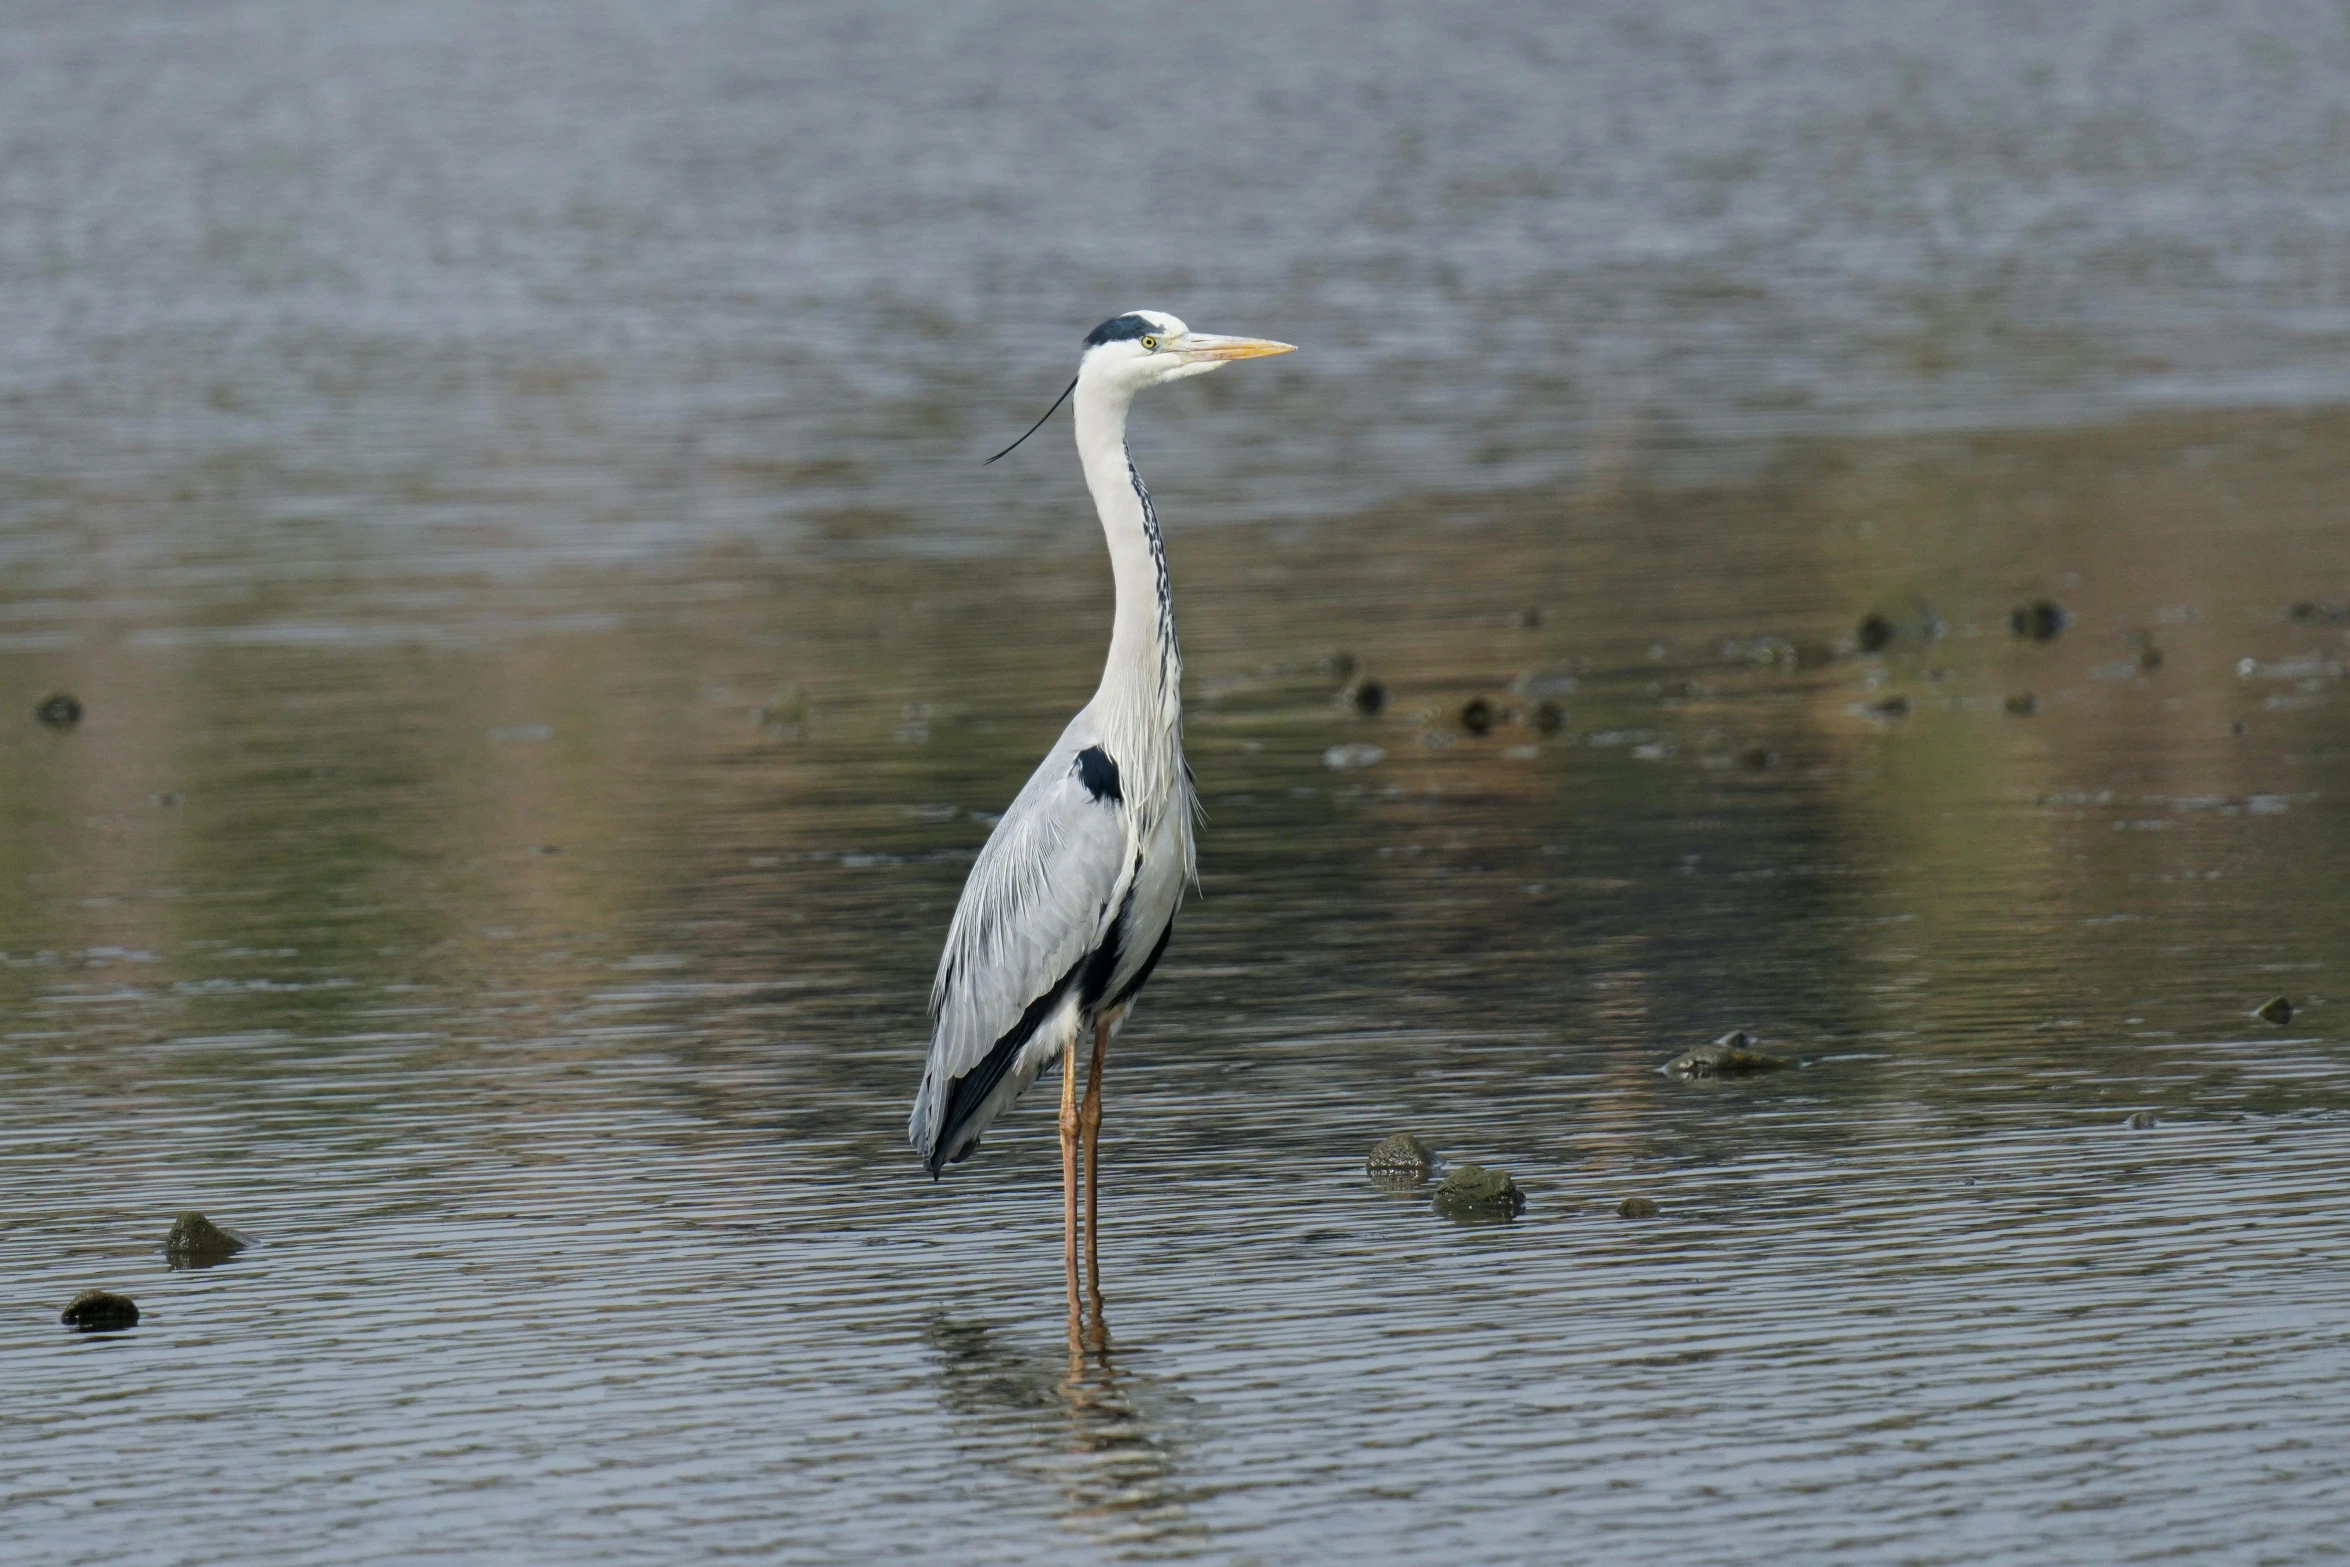 a bird that is standing in the water, large and tall, on a riverbank, no cropping, darren bartley